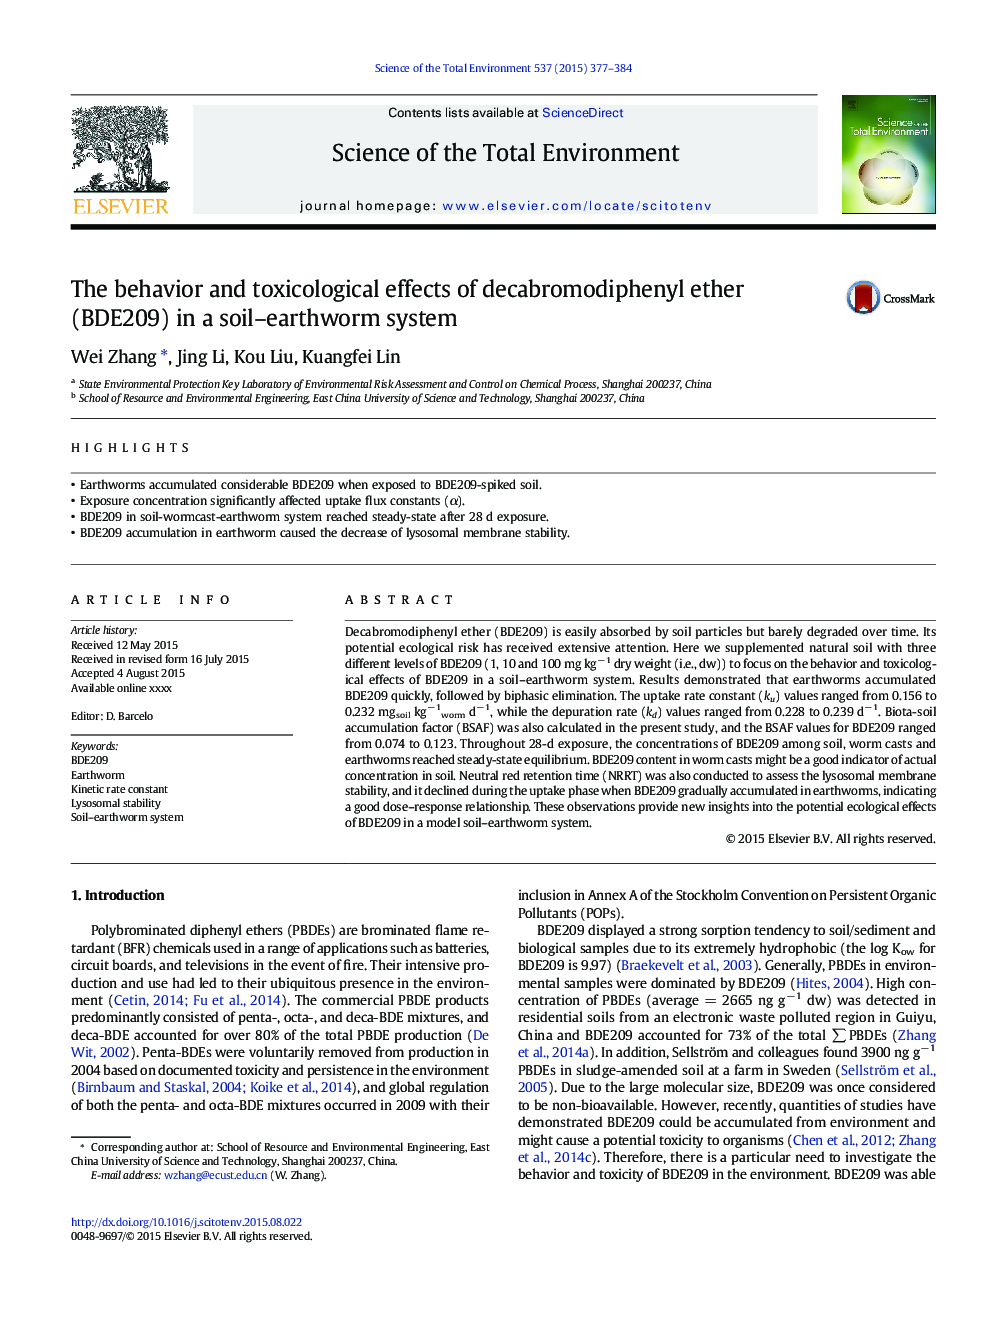 The behavior and toxicological effects of decabromodiphenyl ether (BDE209) in a soil-earthworm system